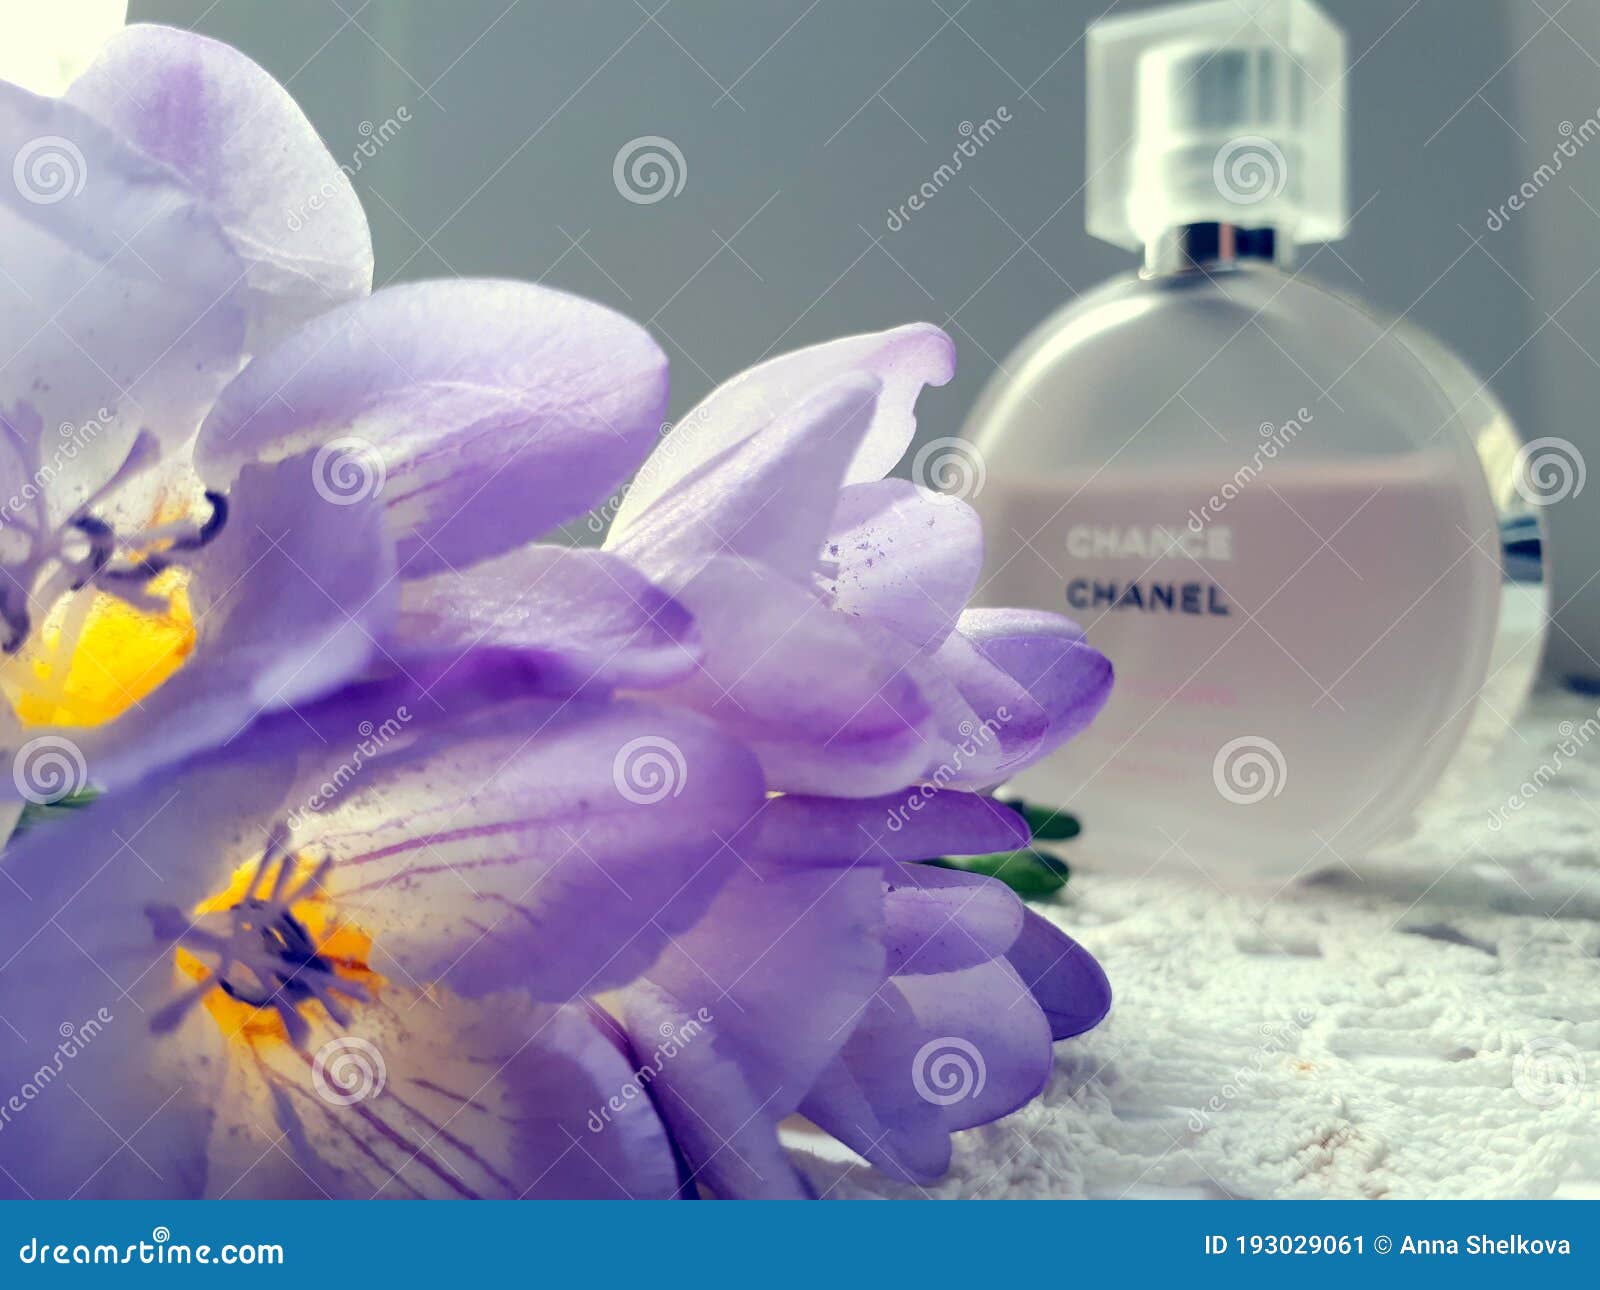 Chance Chanel  Chanel fragrance, Fragrance campaign, Perfume photography